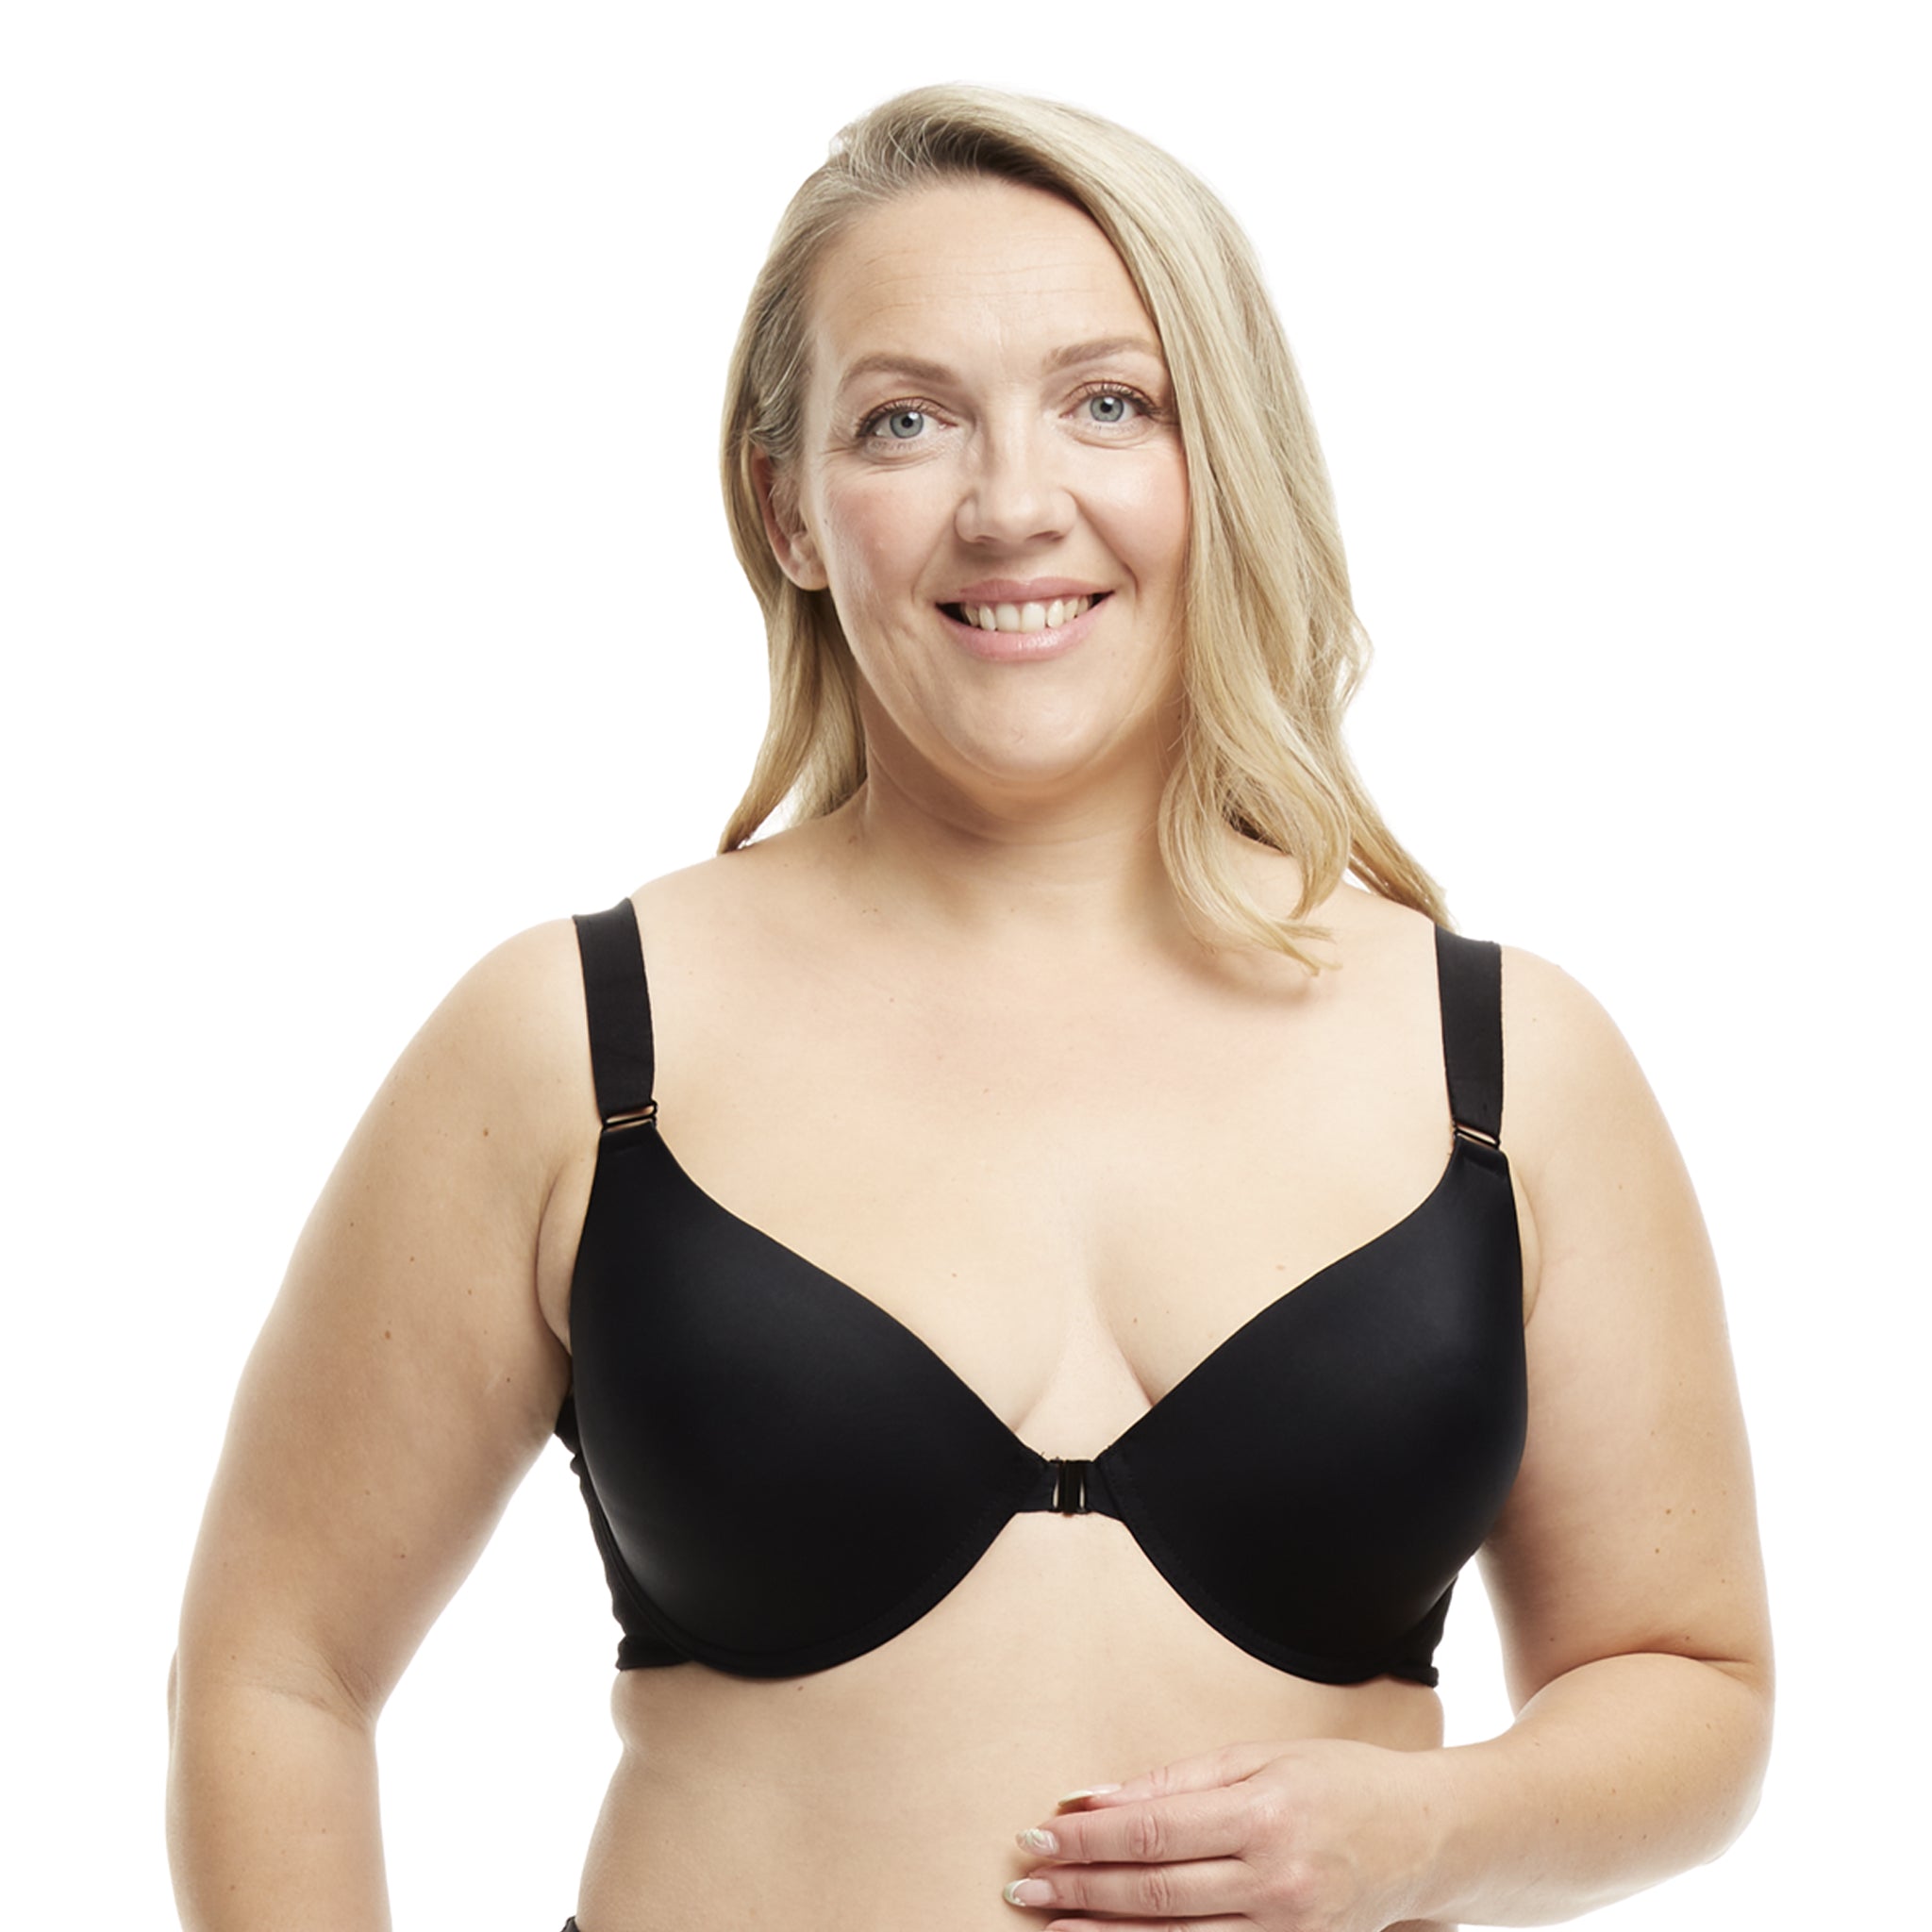 Plus Size Posture Large Size Bras With Front Closure And Back Support In  Black, White, And Beige Available In Sizes 34 40 B/C/D/DD Y200415330v From  Char21, $33.36